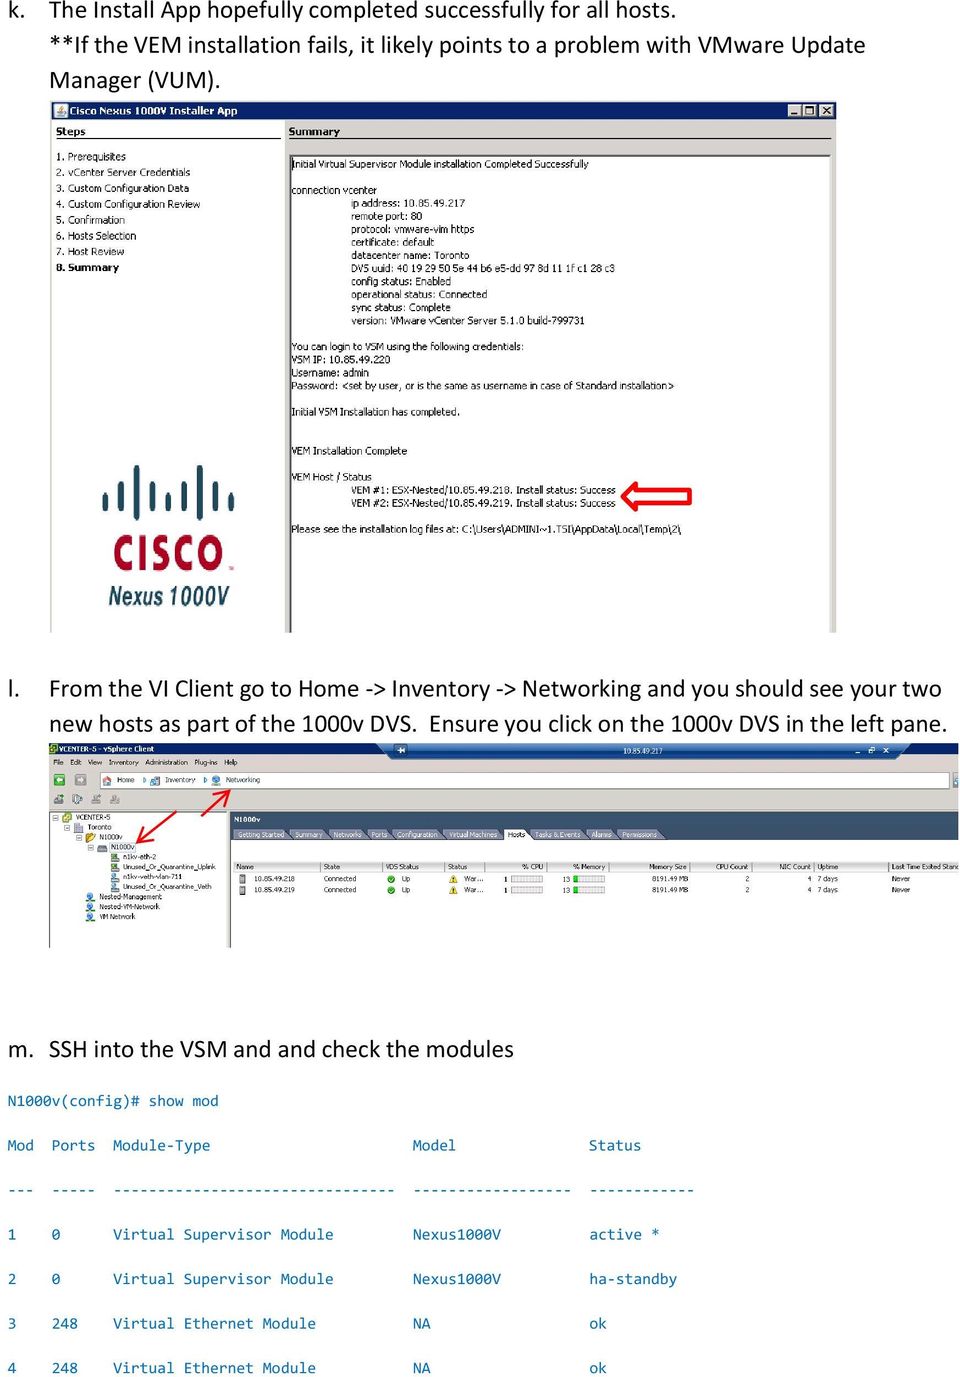 From the VI Client go to Home -> Inventory -> Networking and you should see your two new hosts as part of the 1000v DVS. Ensure you click on the 1000v DVS in the left pane.